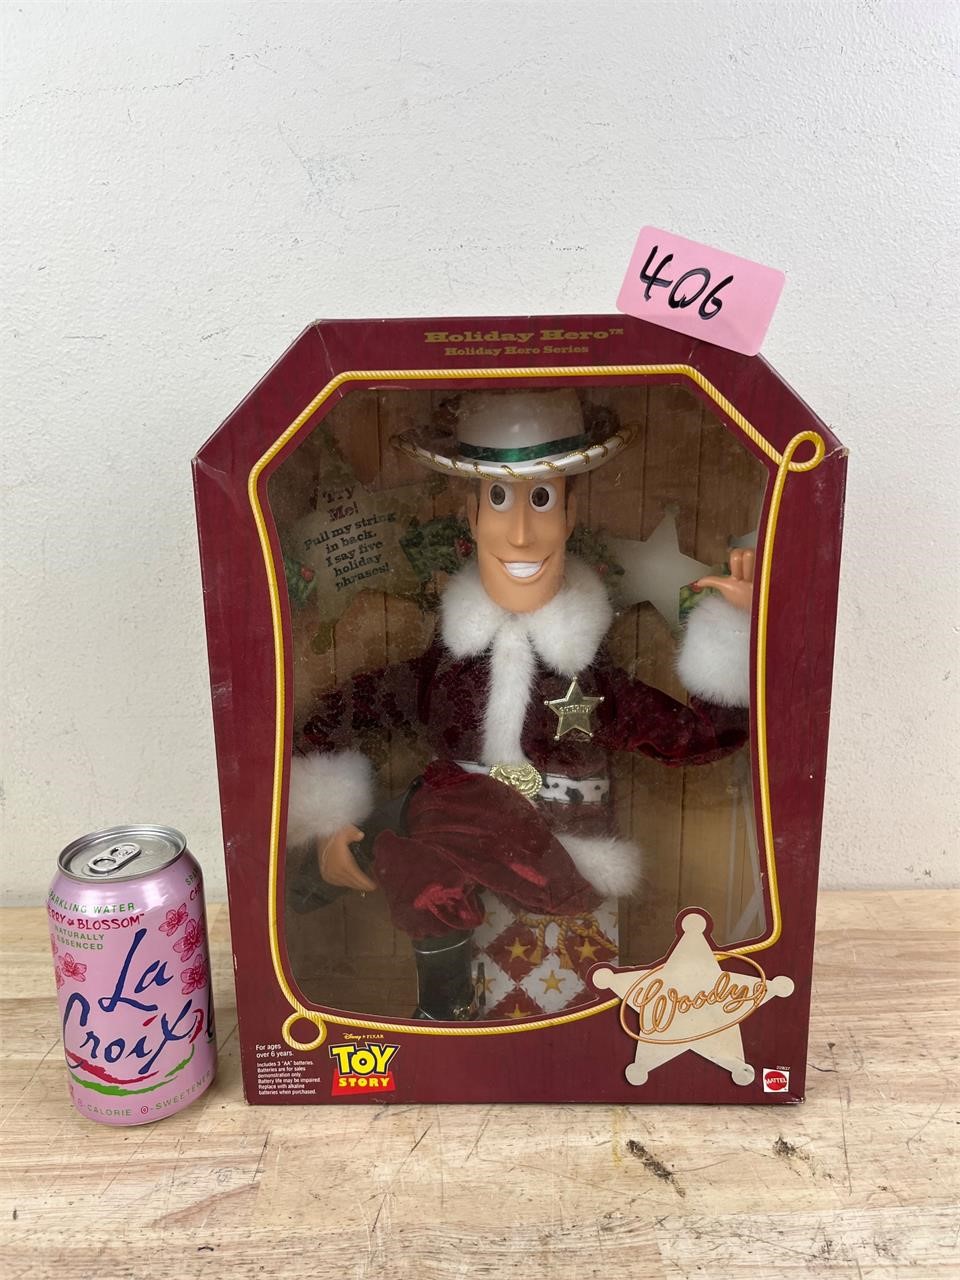 In Box Toy Story Holiday Hero Woody